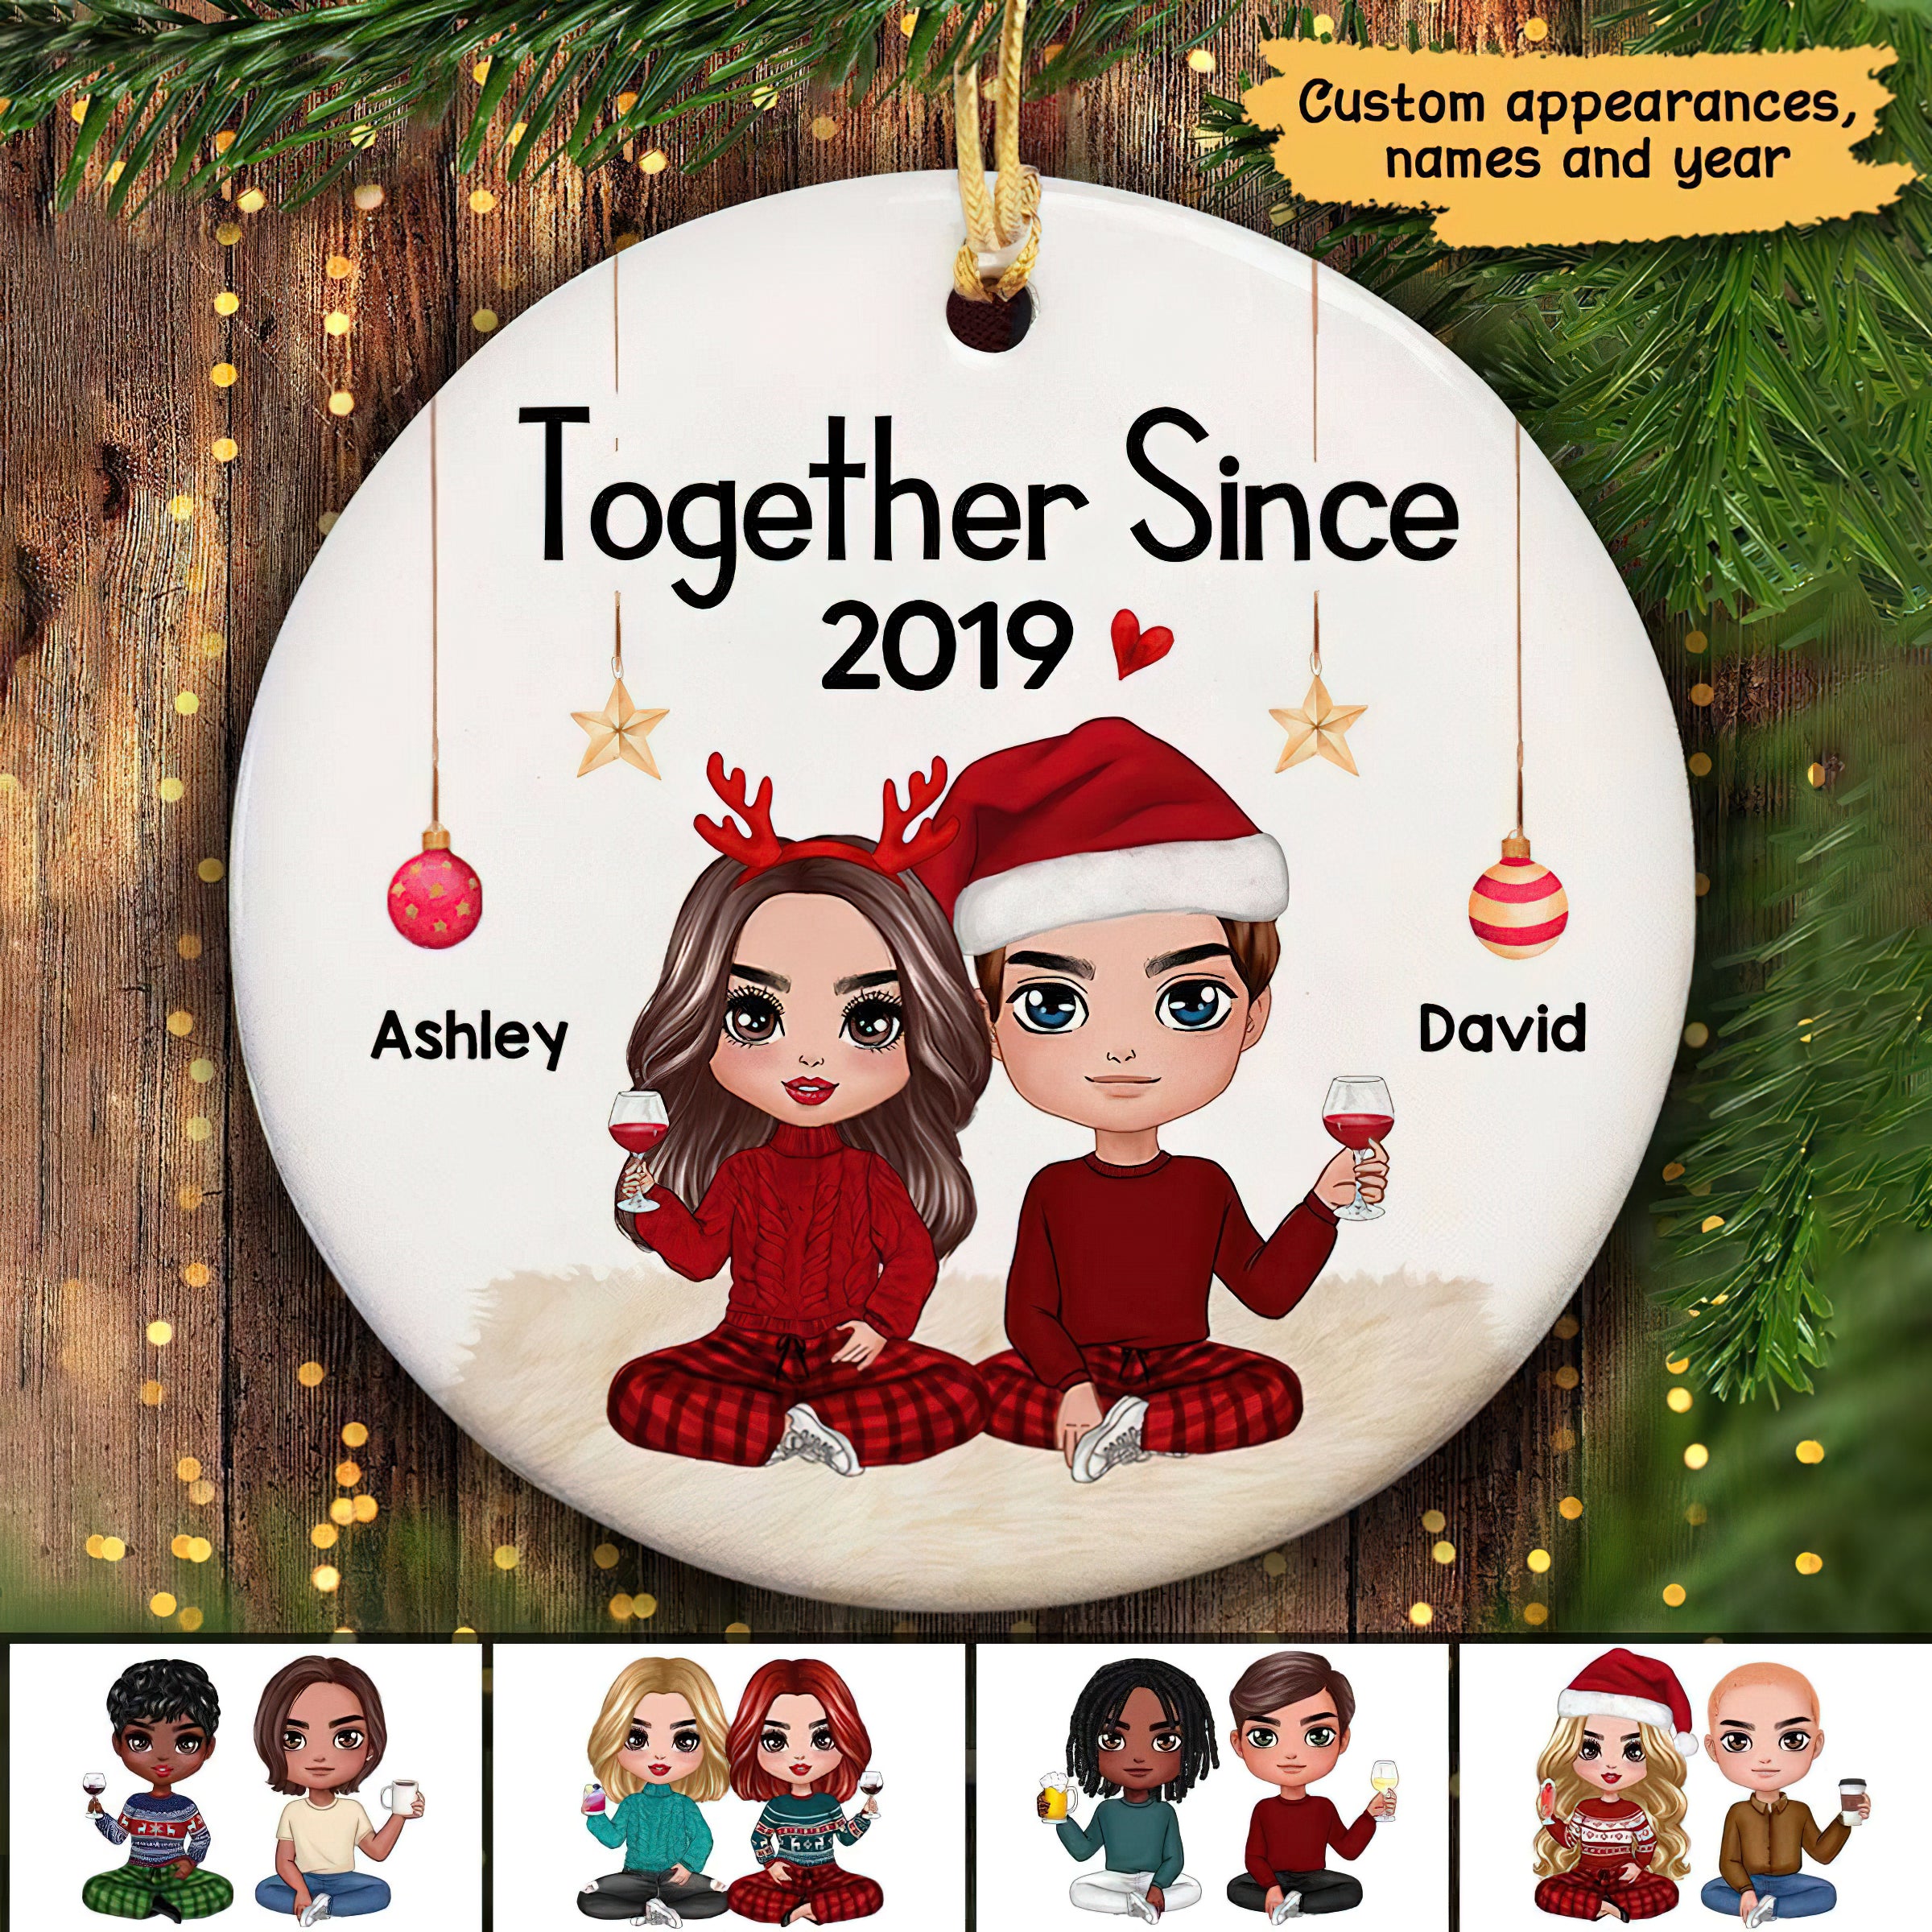 Doll Couple Sitting Christmas Gift For Him For Her Personalized Circle Ornament